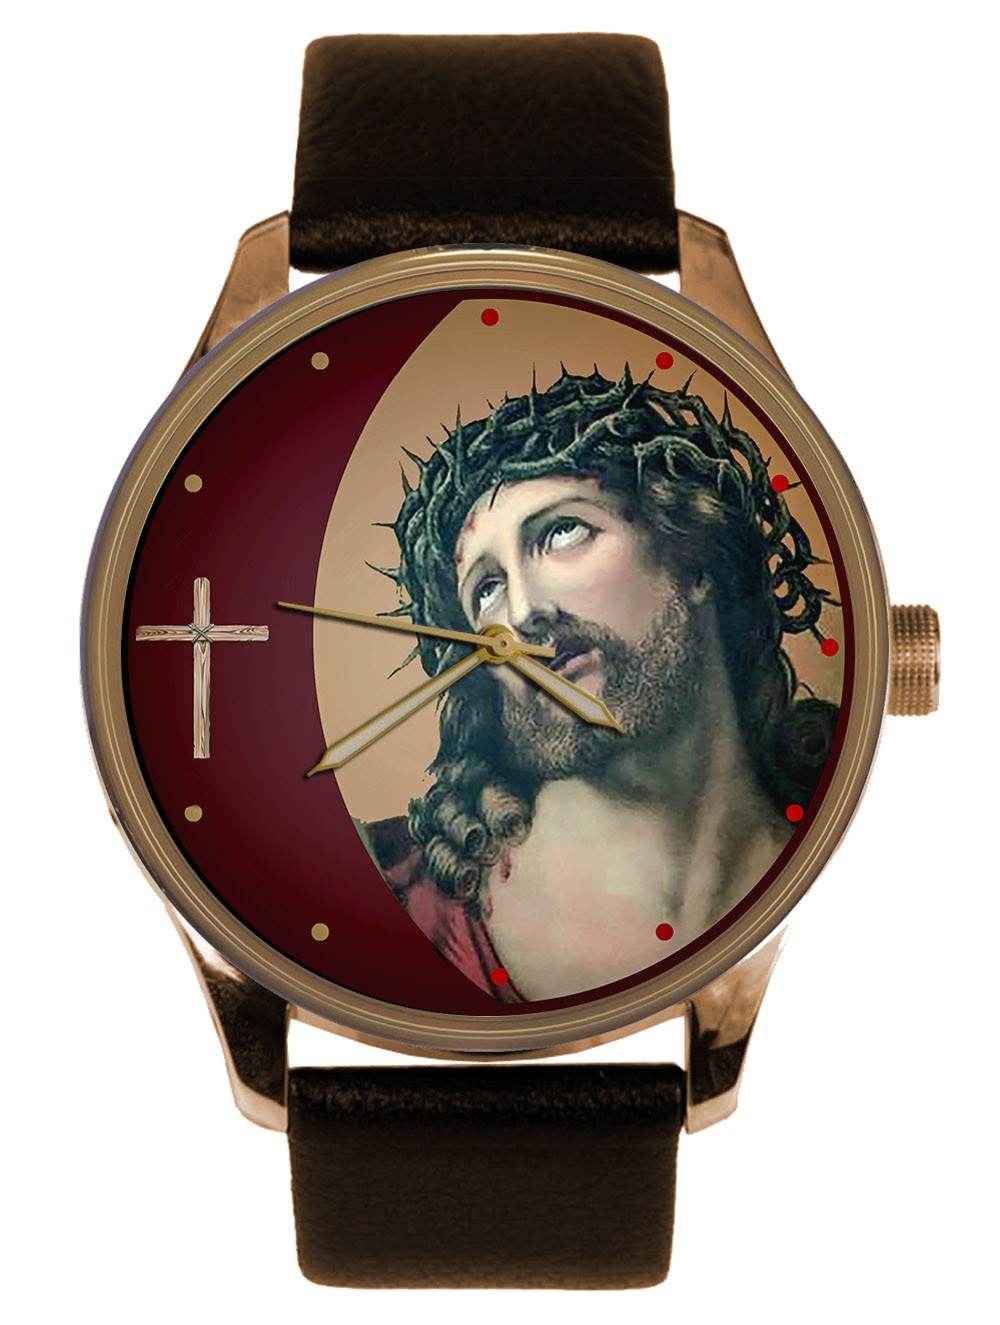 Christian Bale Movie Watches | The Watch Club by SwissWatchExpo